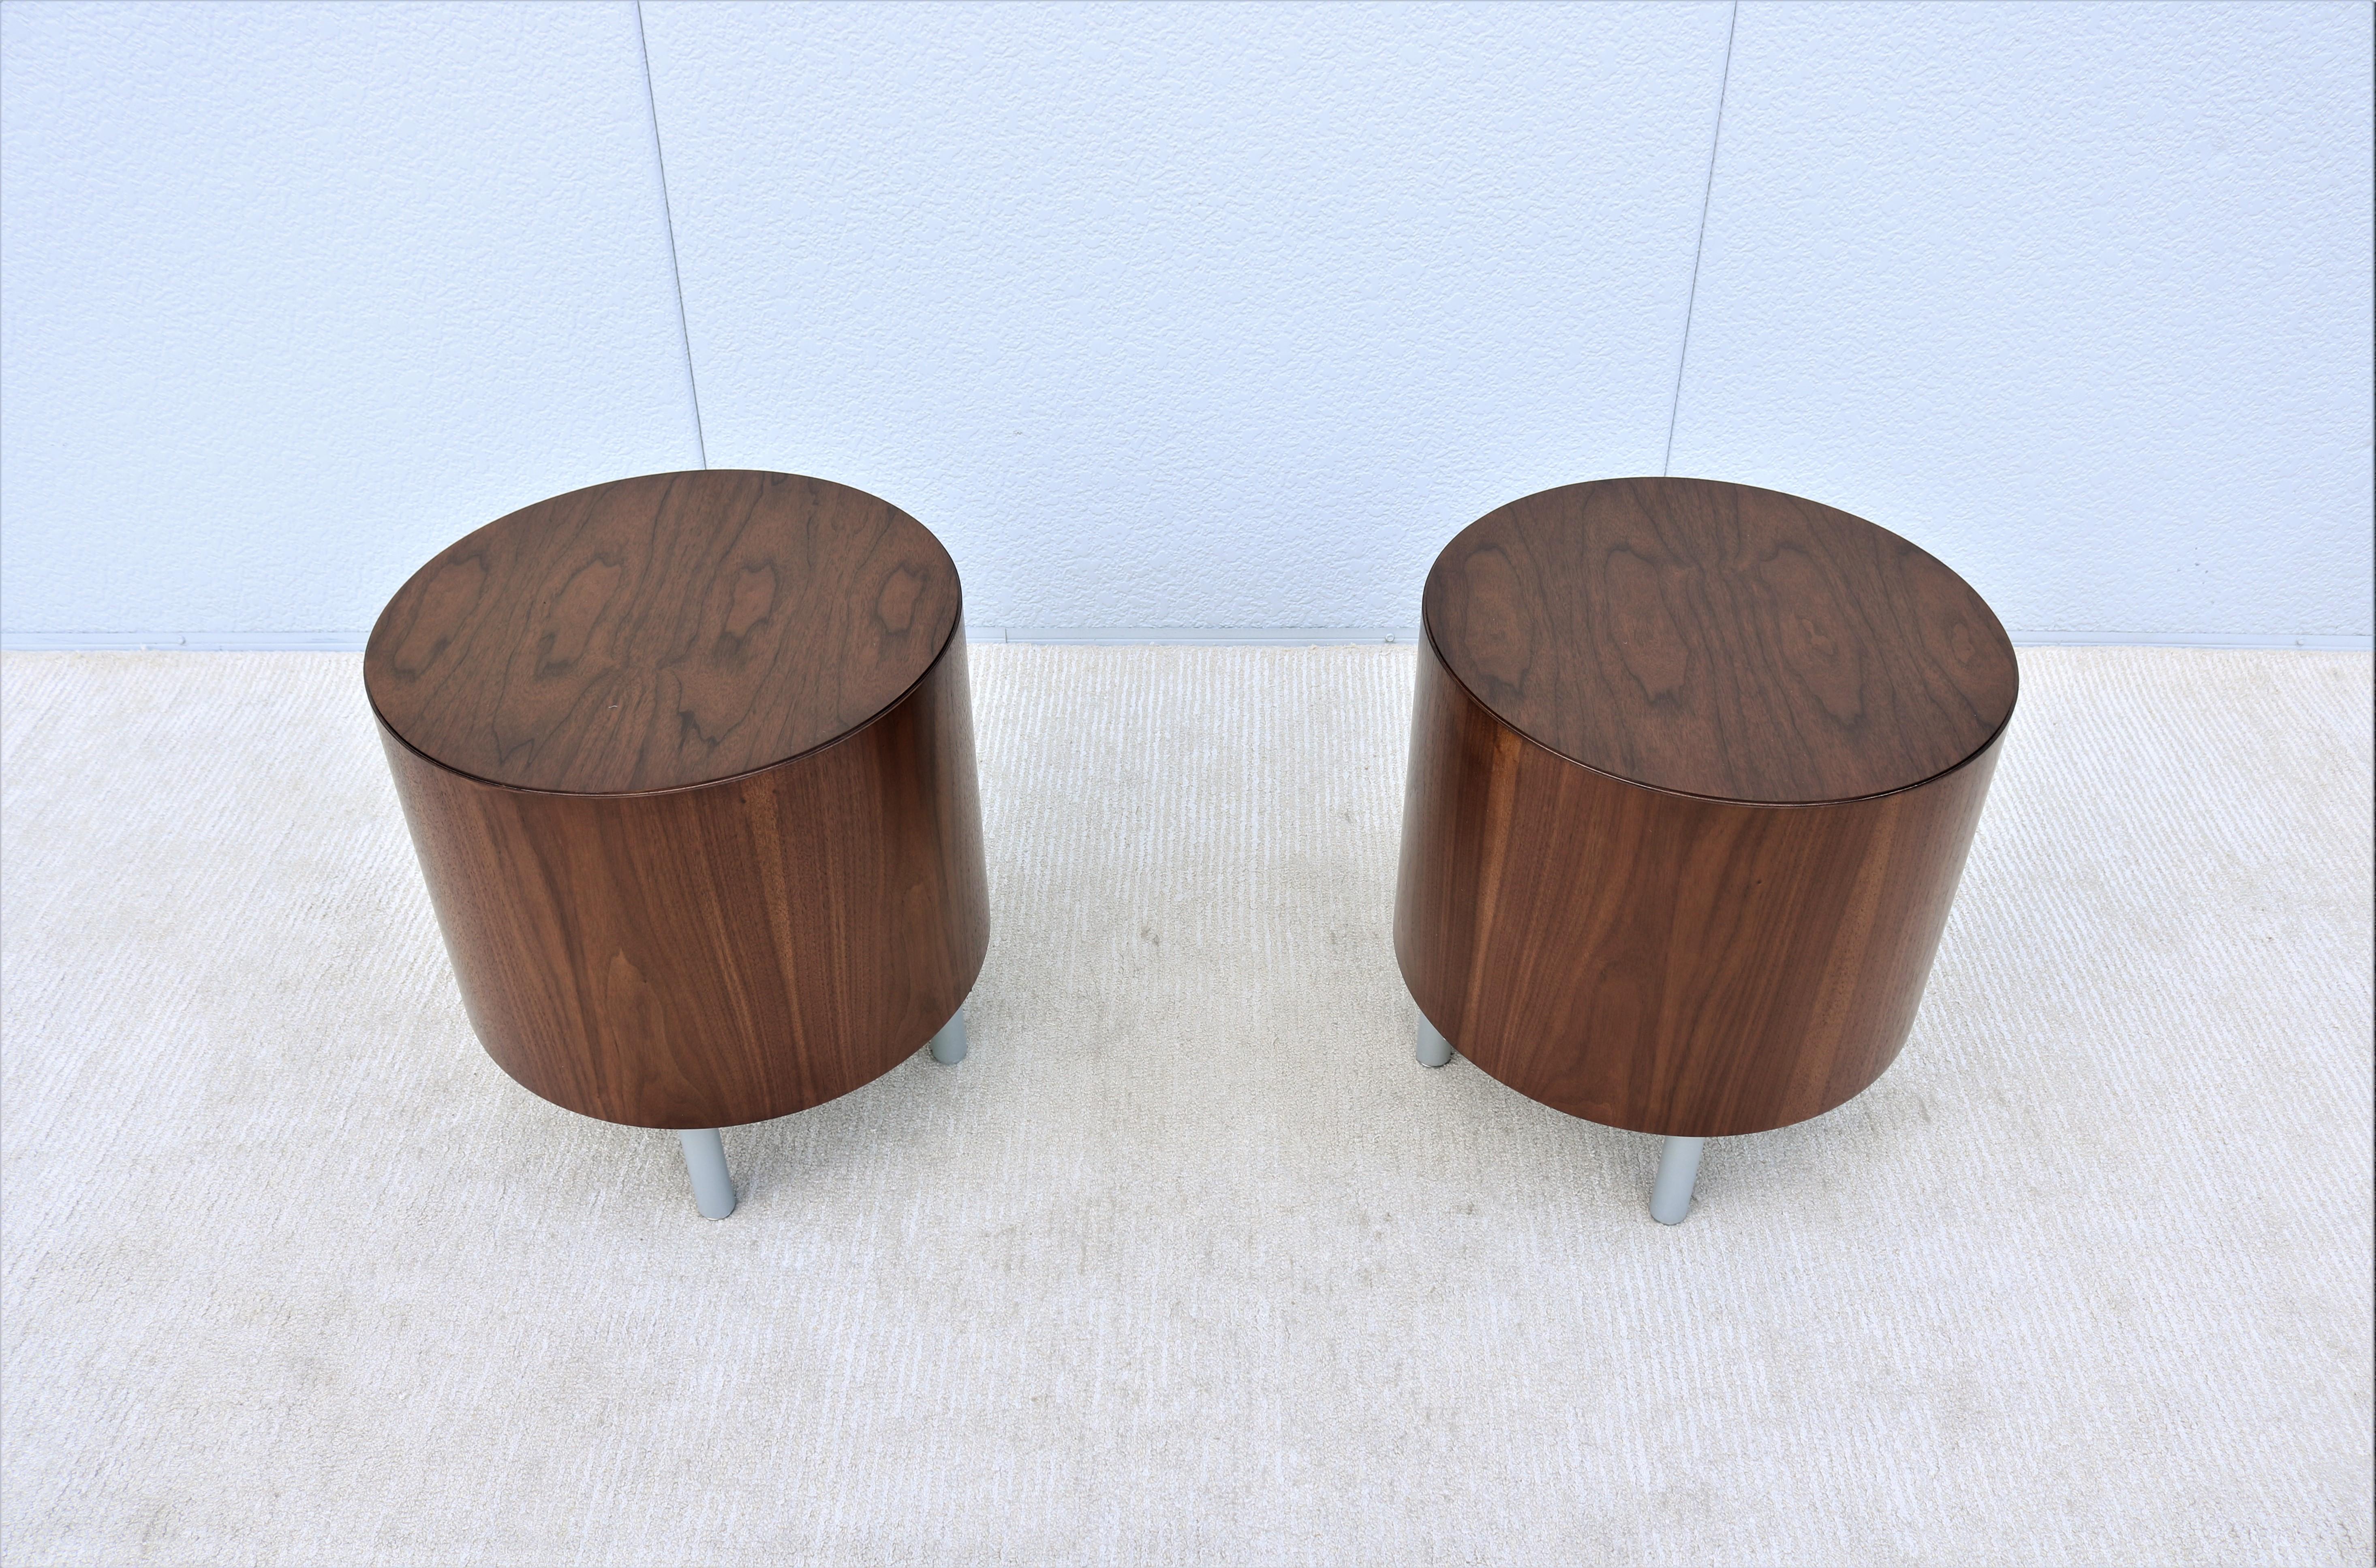 American Mid-Century Modern Style Kimball Villa Round Walnut Wood Drum Side Tables a Pair For Sale